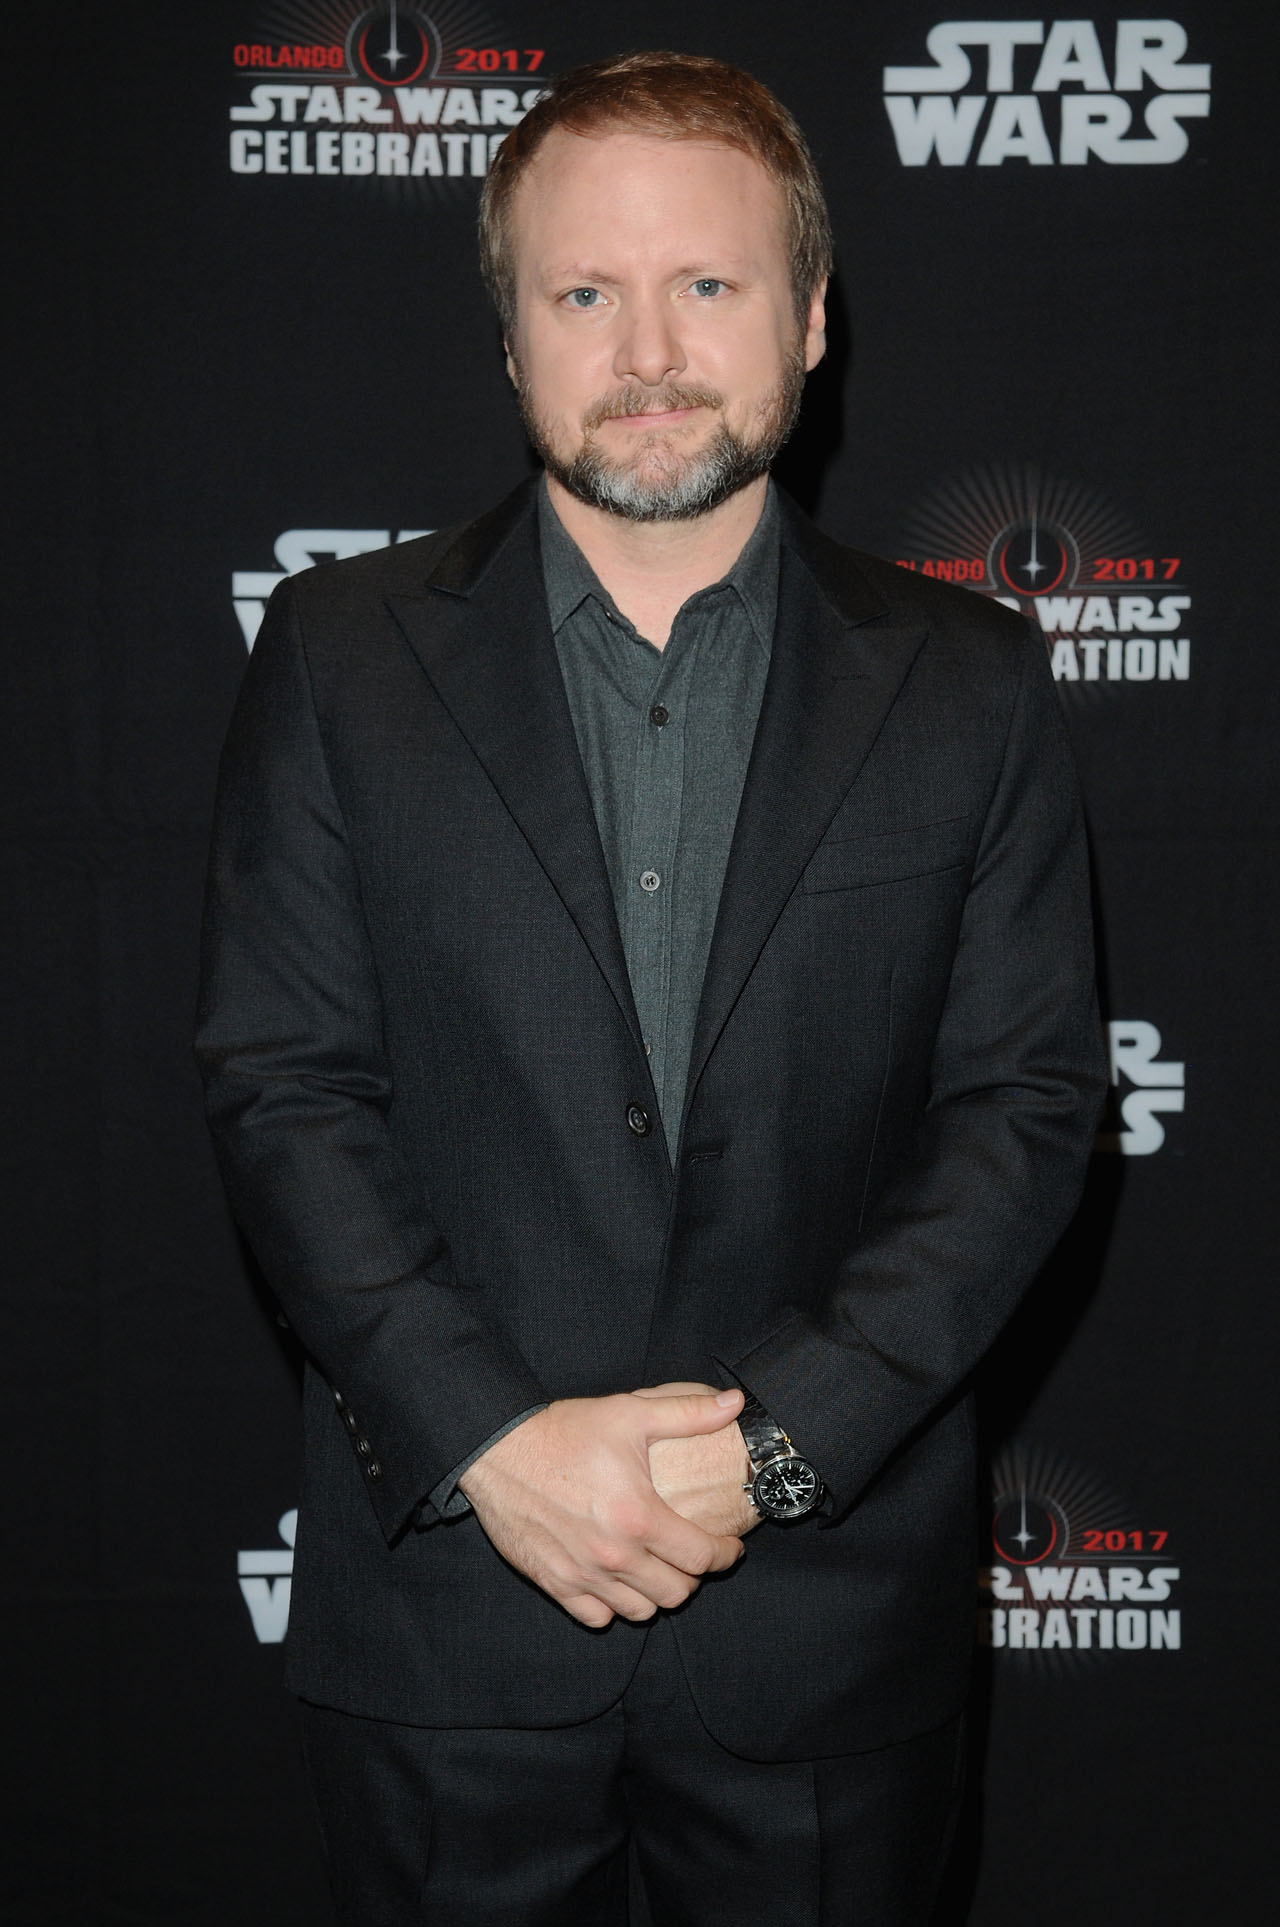 ORLANDO, FL - APRIL 14:  Rian Johnson attends the STAR WARS: THE LAST JEDI PANEL during the 2017 STAR WARS CELEBRATION at Orange County Convention Center on April 14, 2017 in Orlando, Florida.  (Photo by Gerardo Mora/Getty Images for Disney) *** Local Caption *** Rian Johnson